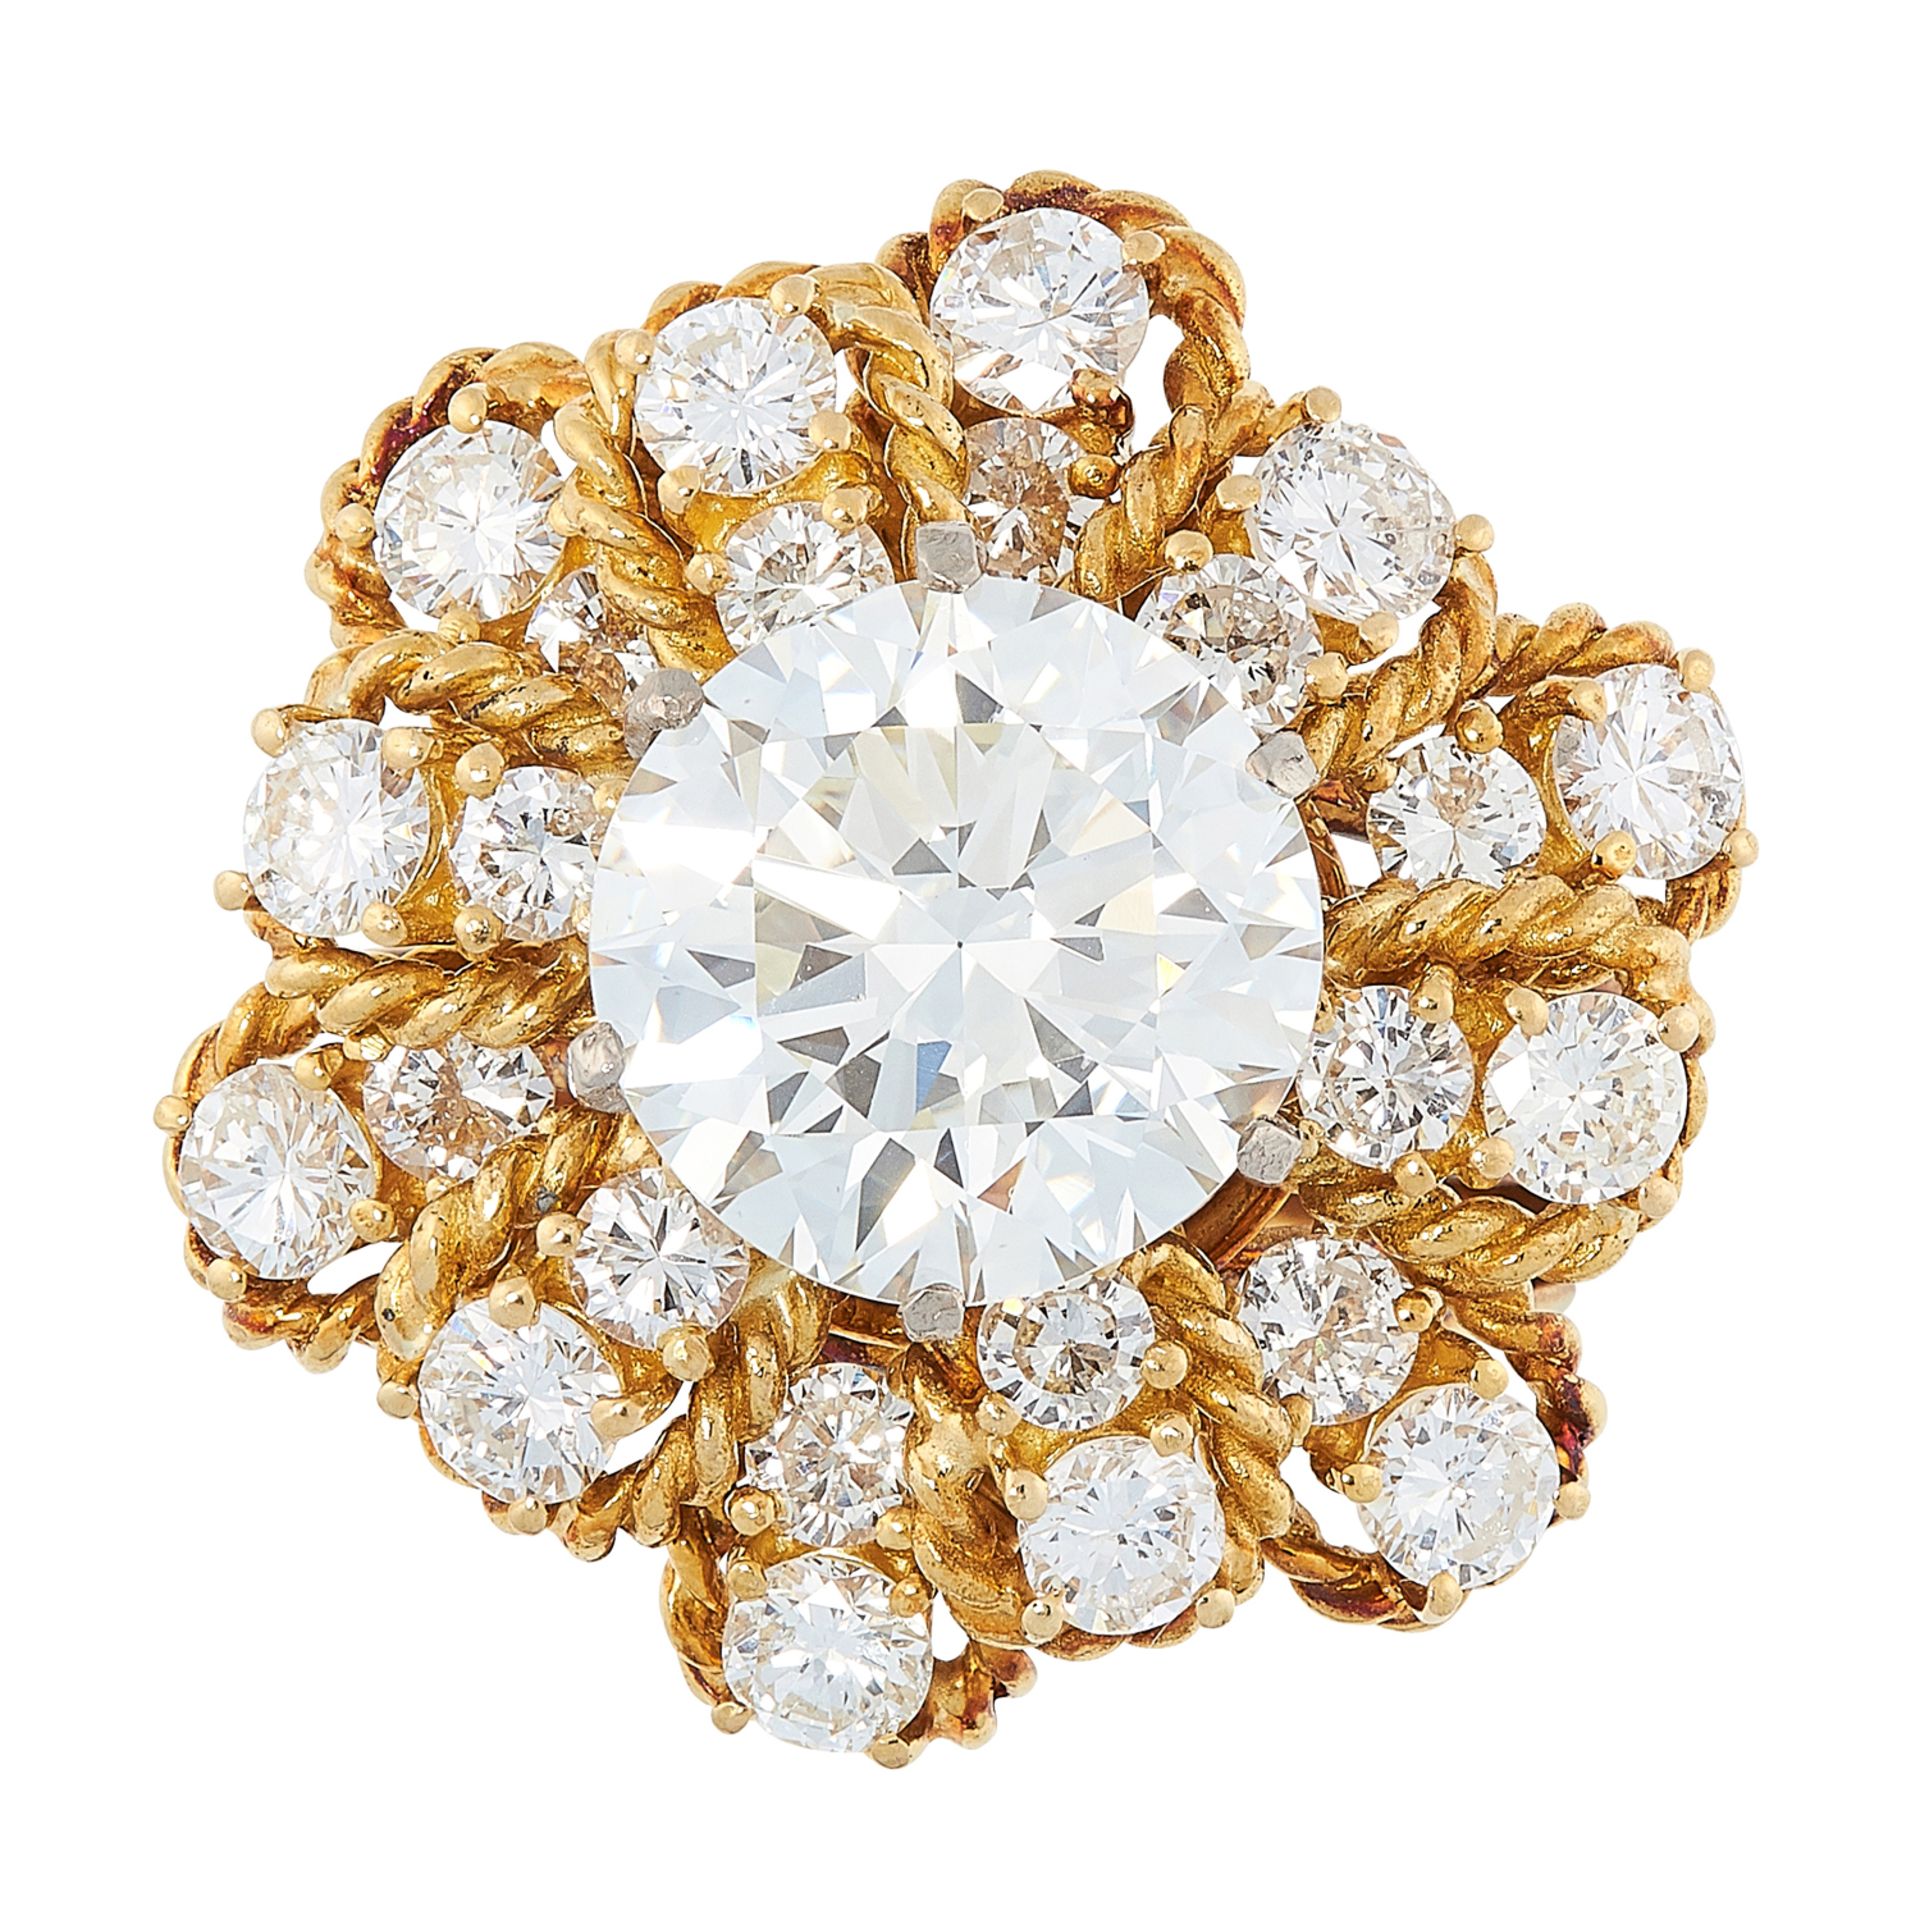 A VINTAGE 4.76 CARAT DIAMOND RING, BEN ROSENFELD 1964 in 18ct yellow gold, set with a central